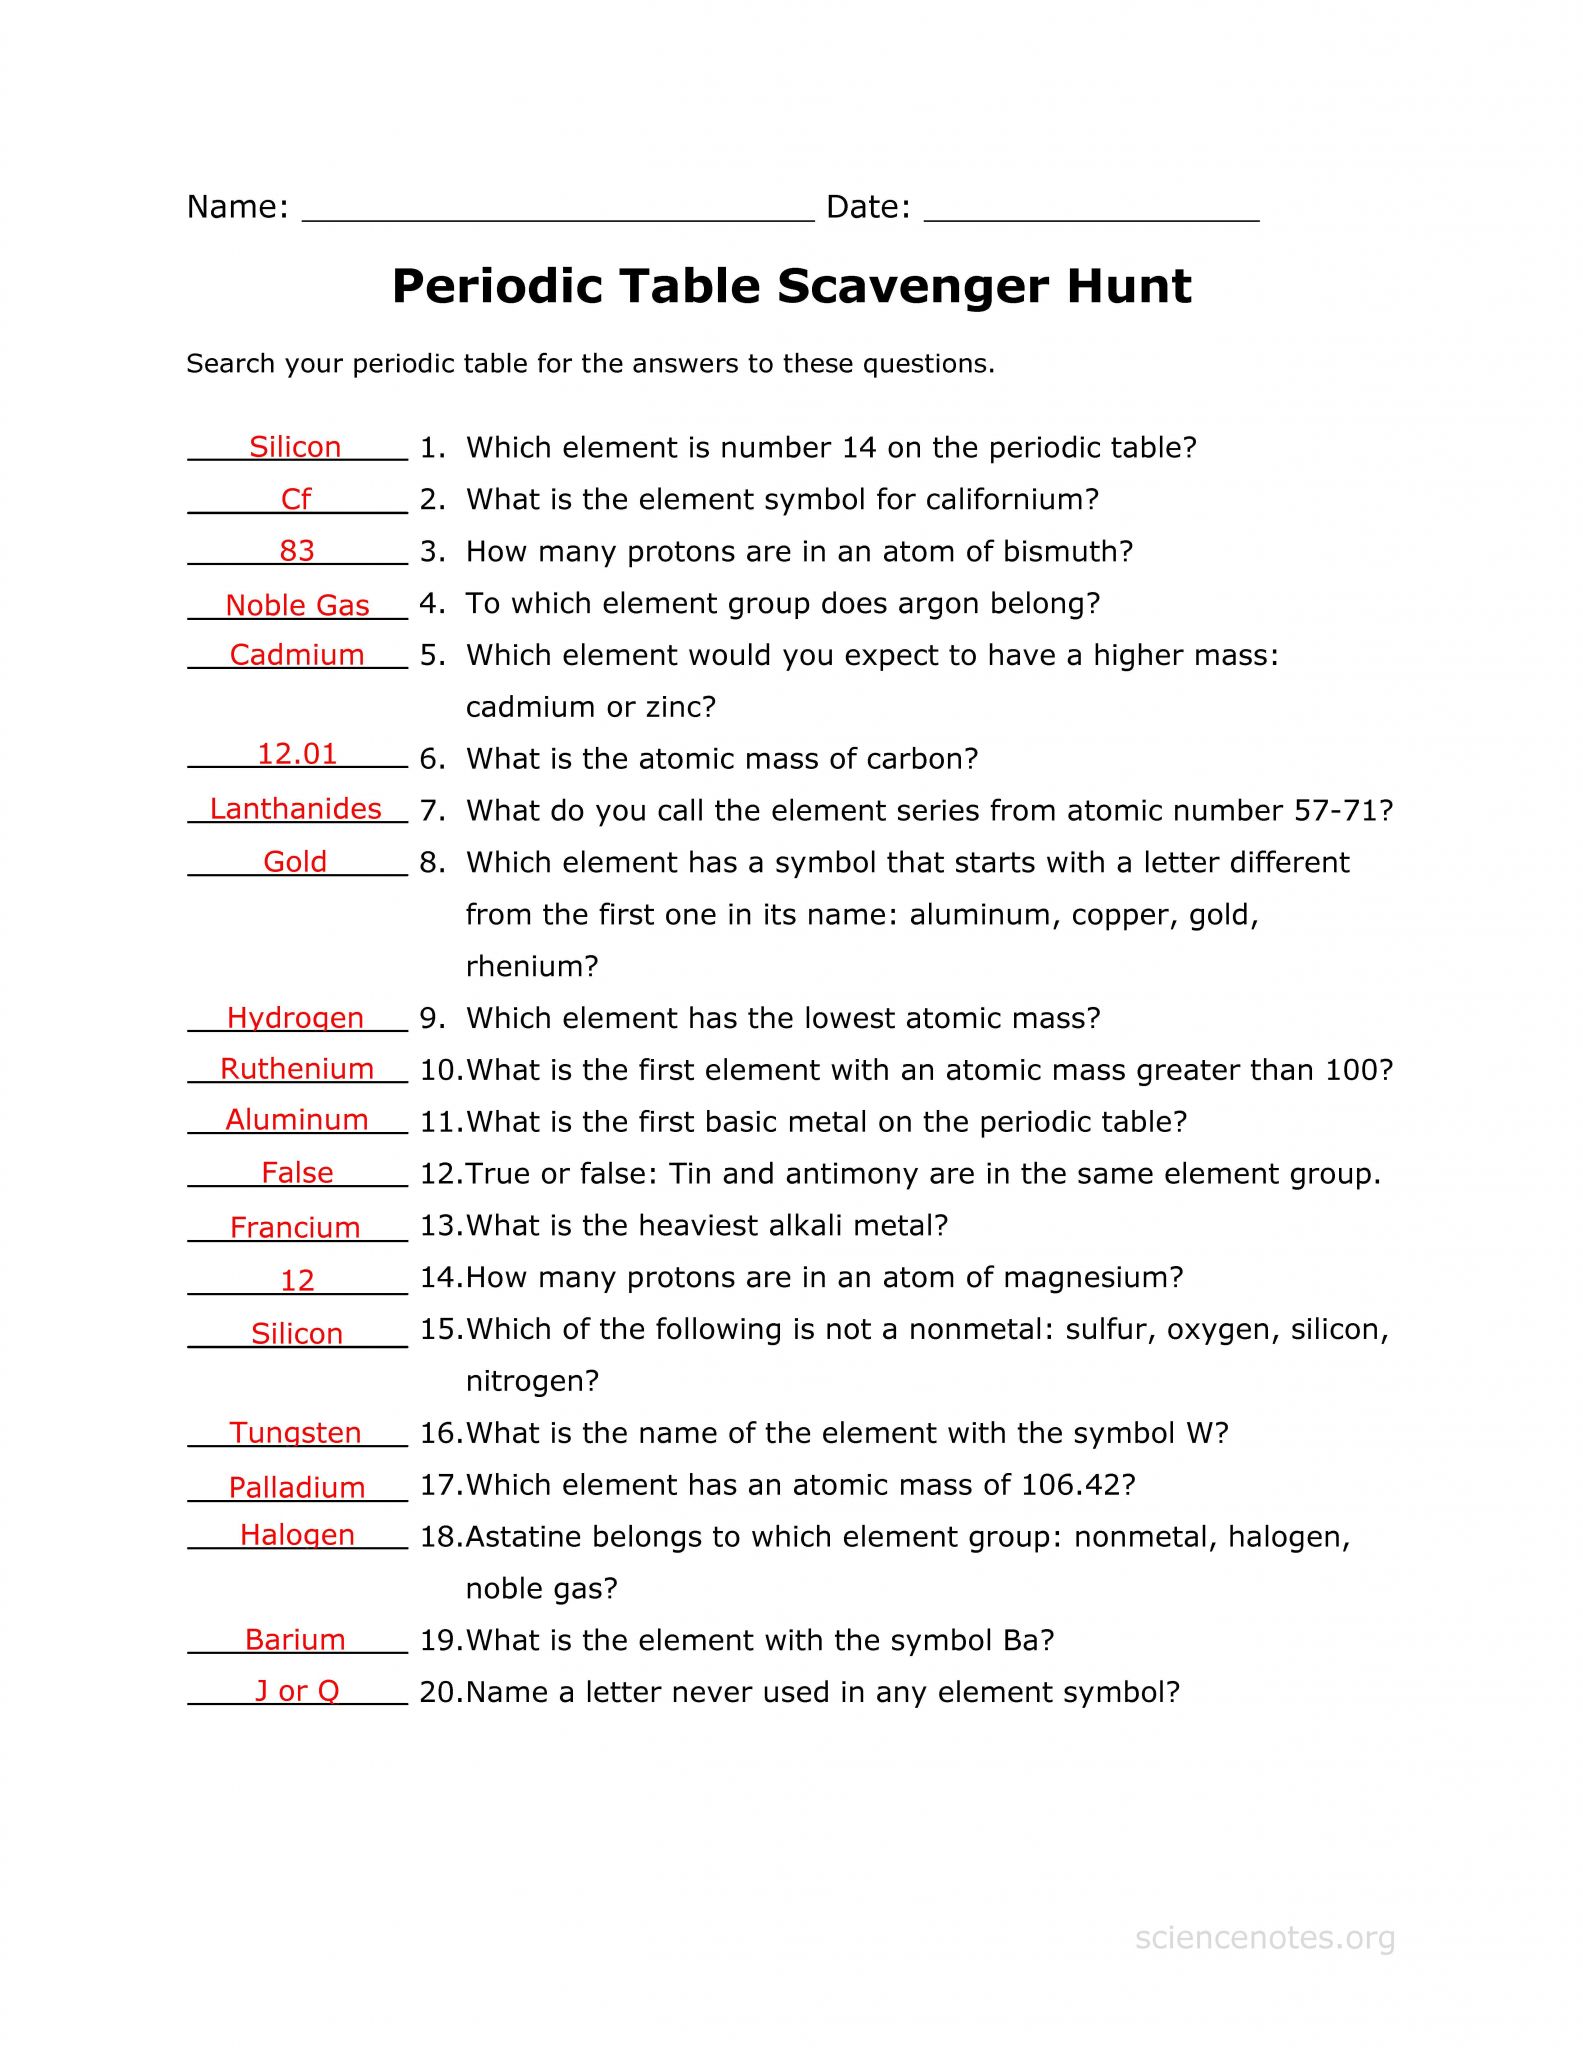 Wave Review Worksheet Answers Along with Answer Key to the Periodic Table Scavenger Hunt Worksheet Related